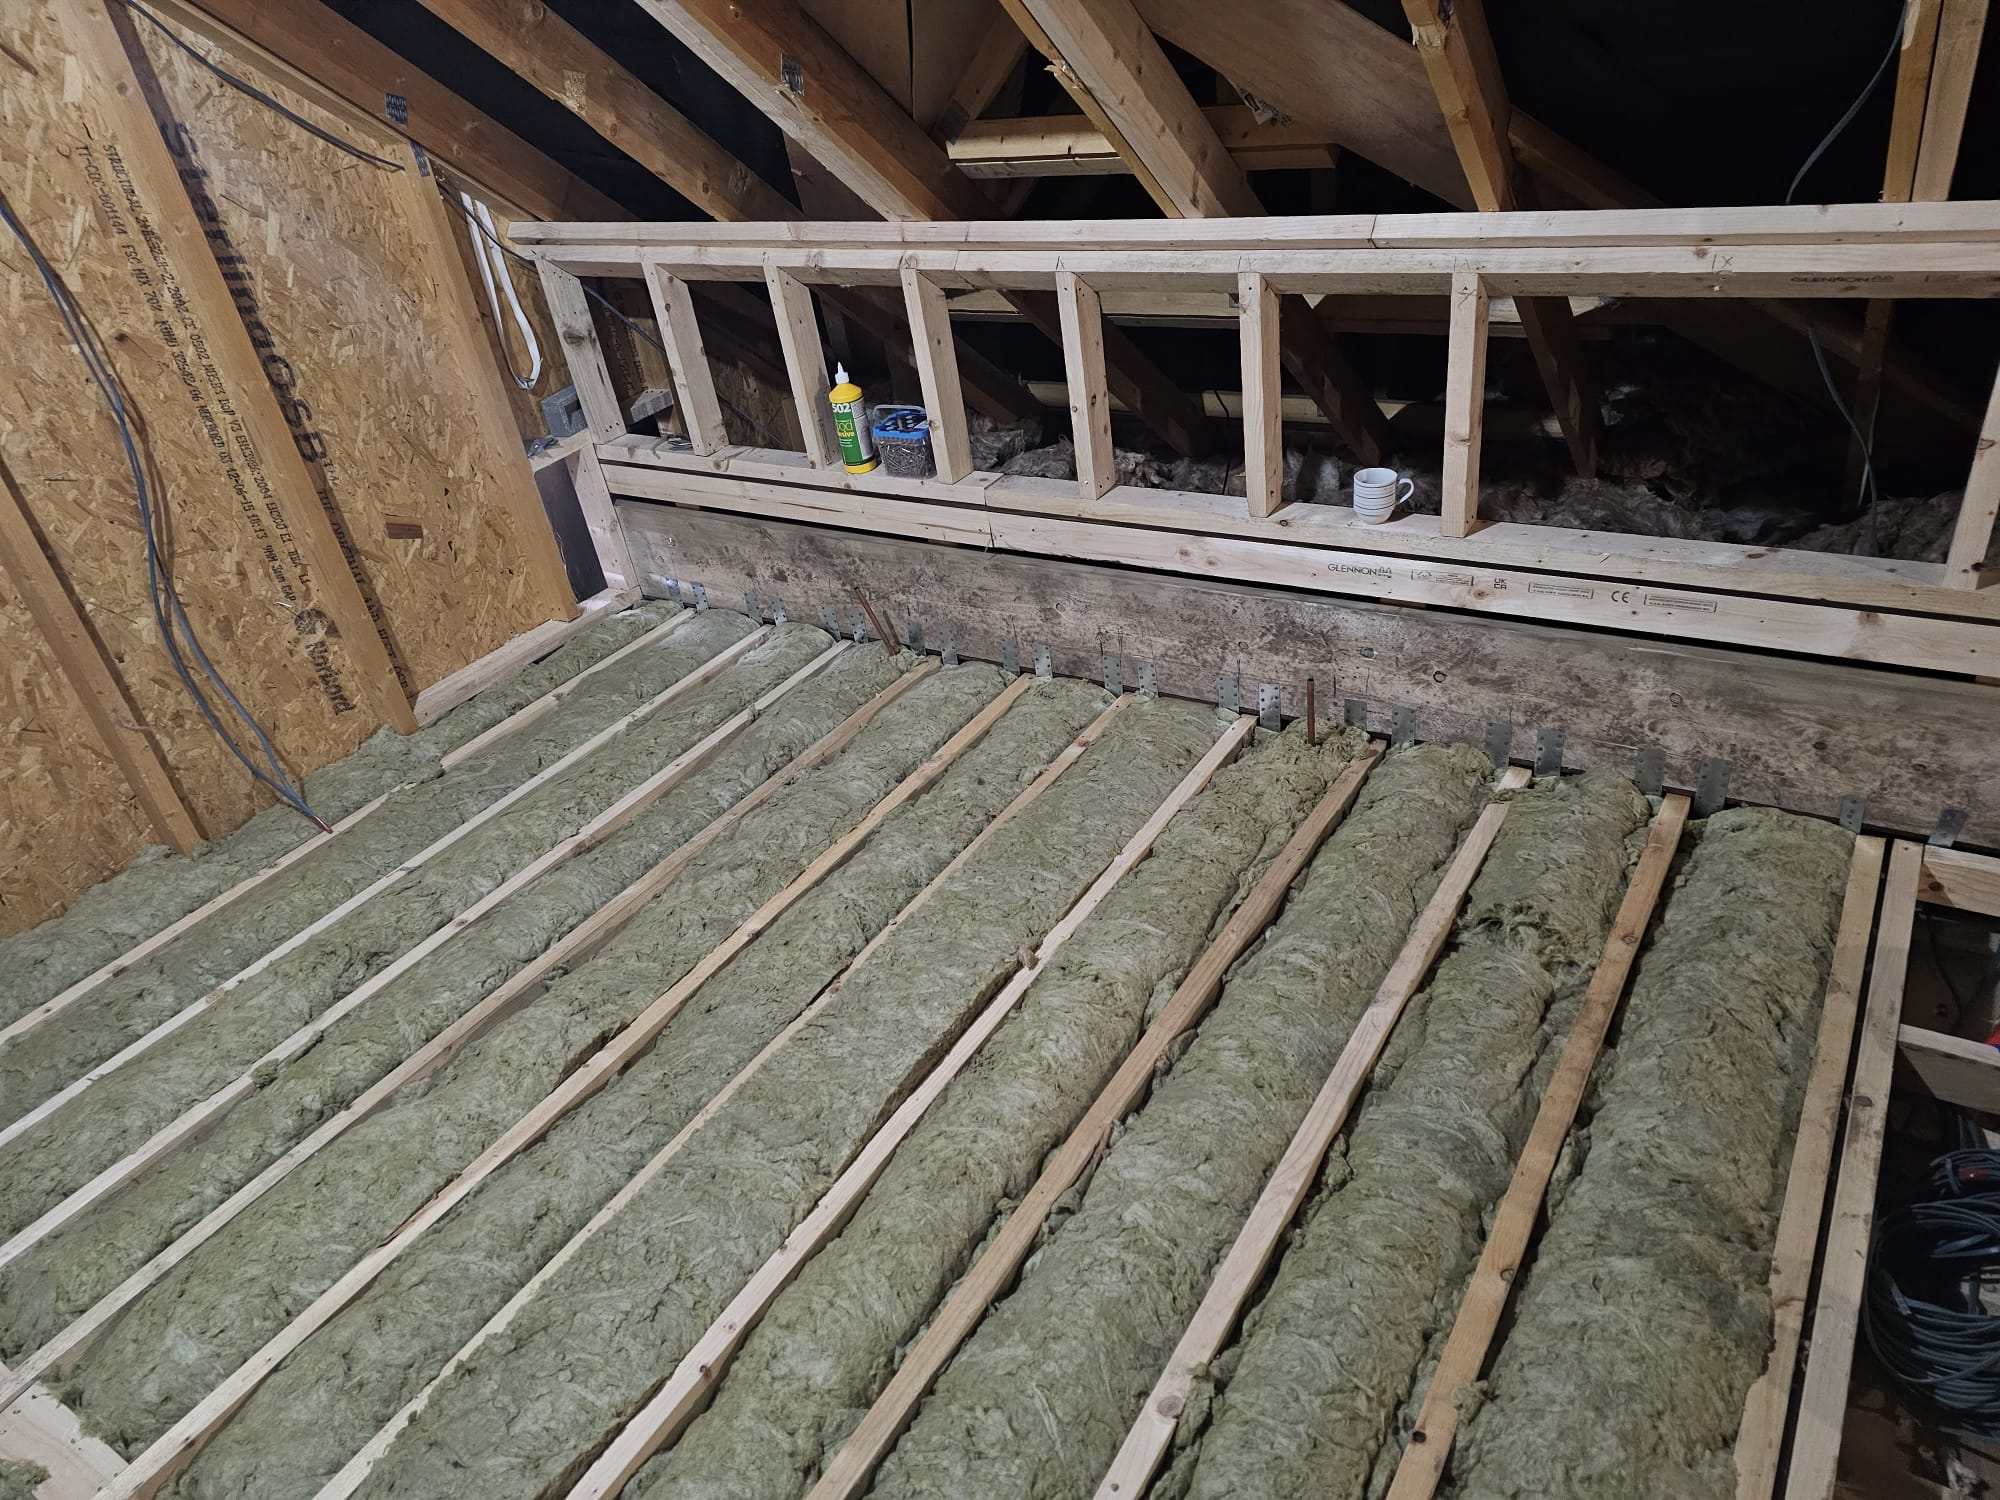 A loft conversion bedroom insulation installation built by topflite loft conversions in northwest england